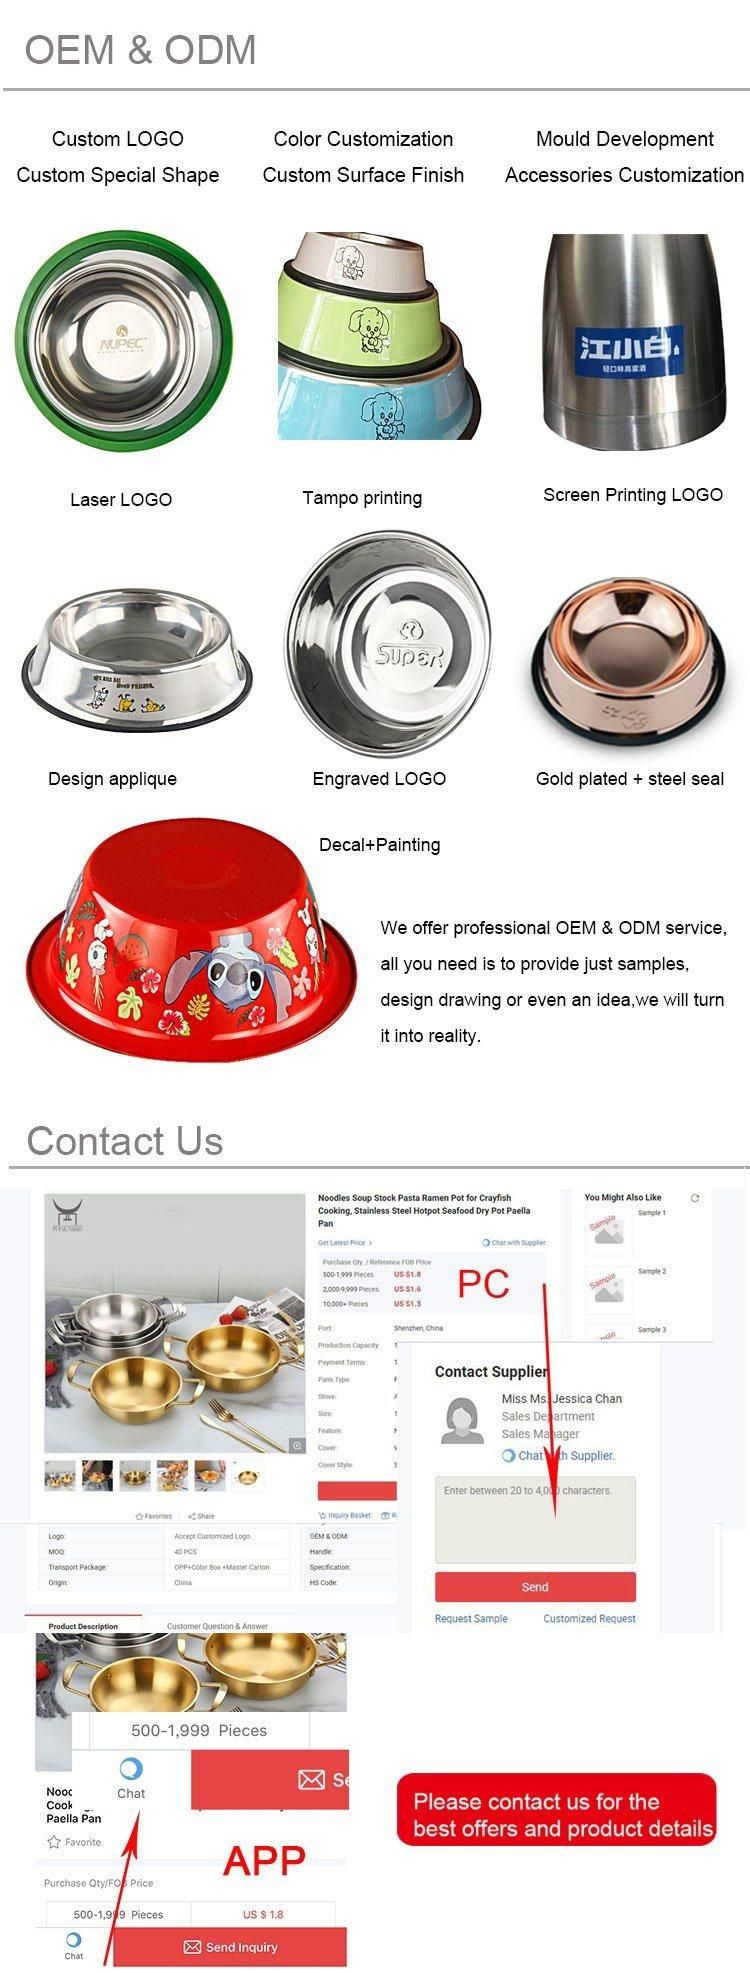 Wholesale Double-Wall Stainless Steel Pet Cat Dog Bowl Metal Pet Feeder with Detachable Silicone Bottom, Manufacturer Pet Products